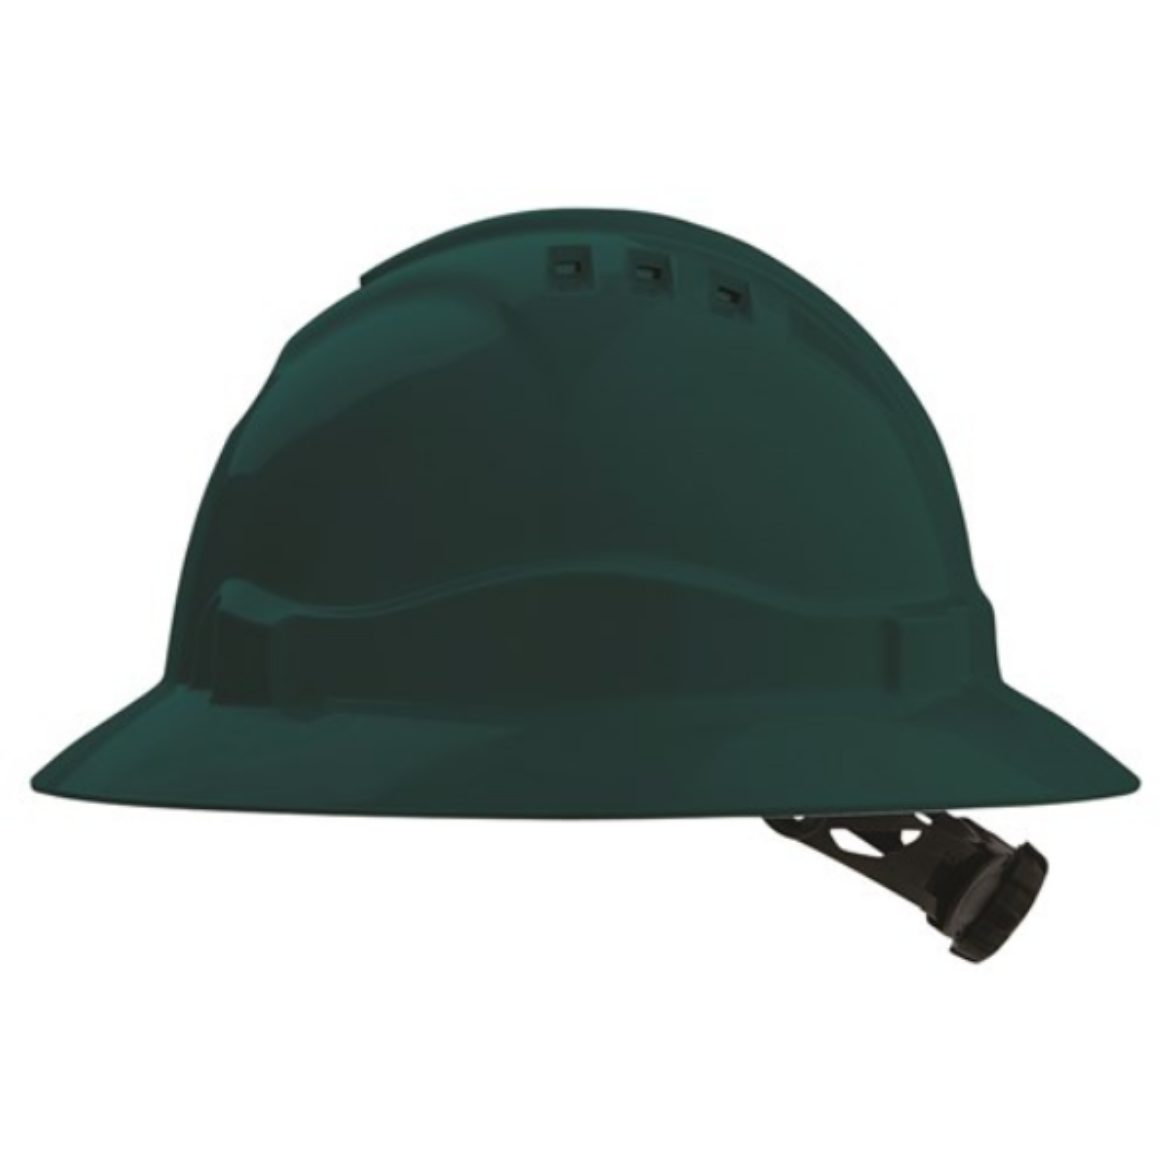 Picture of HHV6FB.COLOUR - HARD HAT (V6) - VENTED, FULL BRIM, 6 POINT RATCHET HARNESS. GREEN.